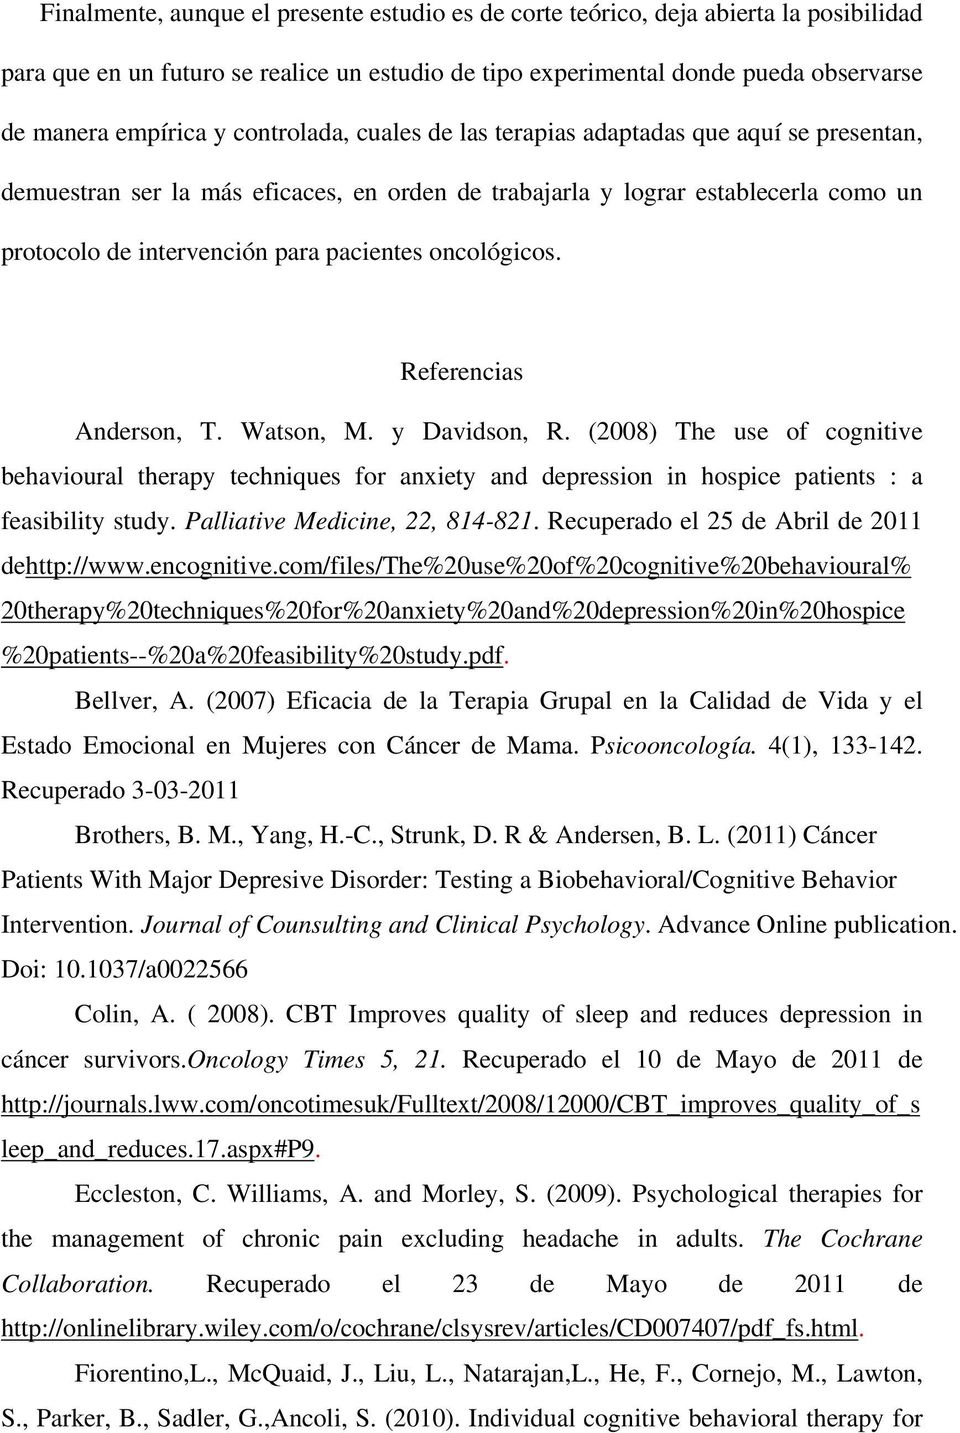 oncológicos. Referencias Anderson, T. Watson, M. y Davidson, R. (2008) The use of cognitive behavioural therapy techniques for anxiety and depression in hospice patients : a feasibility study.